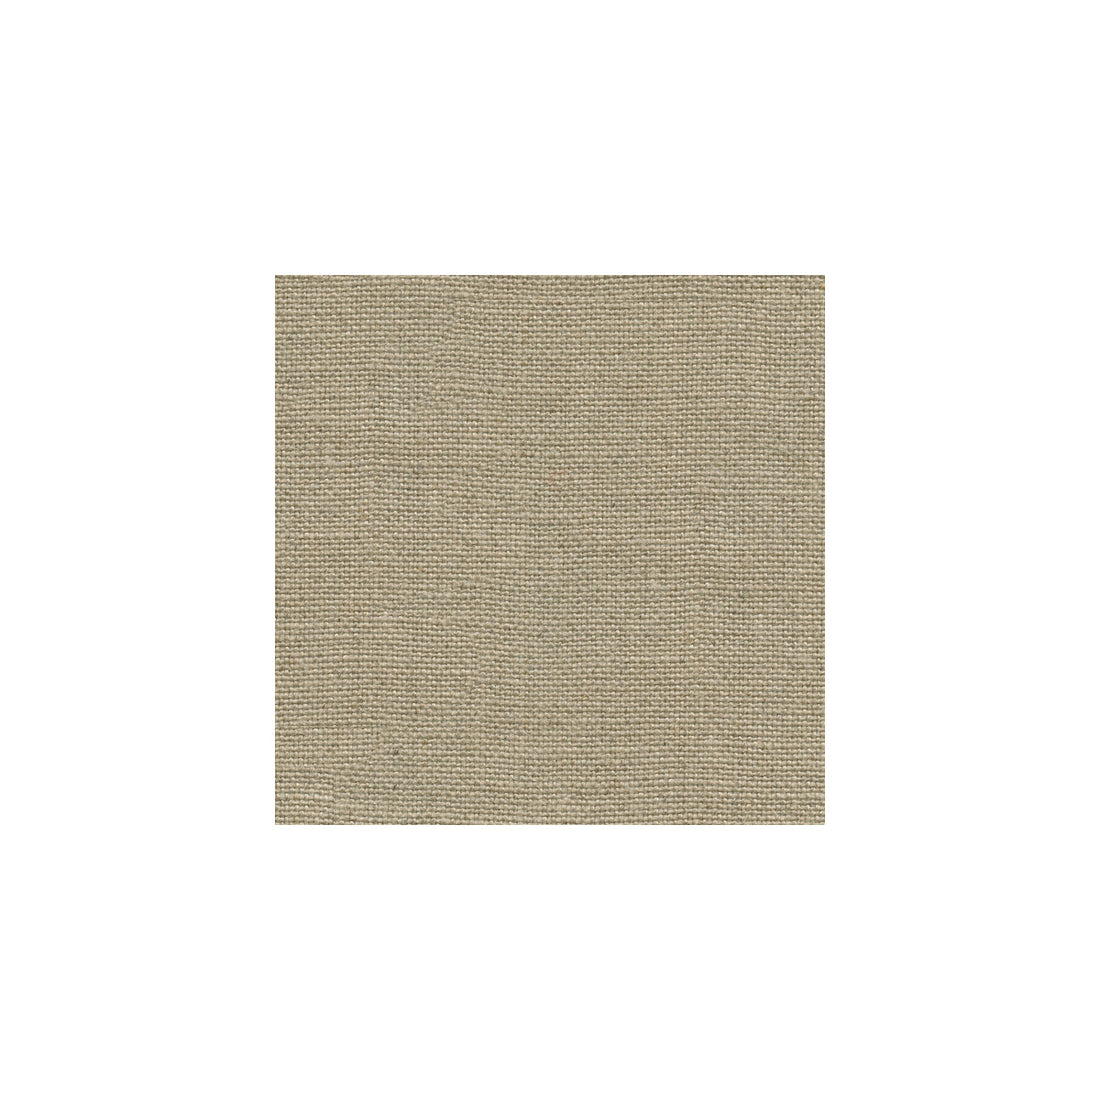 Madison Linen fabric in biscuit color - pattern 32330.116.0 - by Kravet Design in the Gis collection